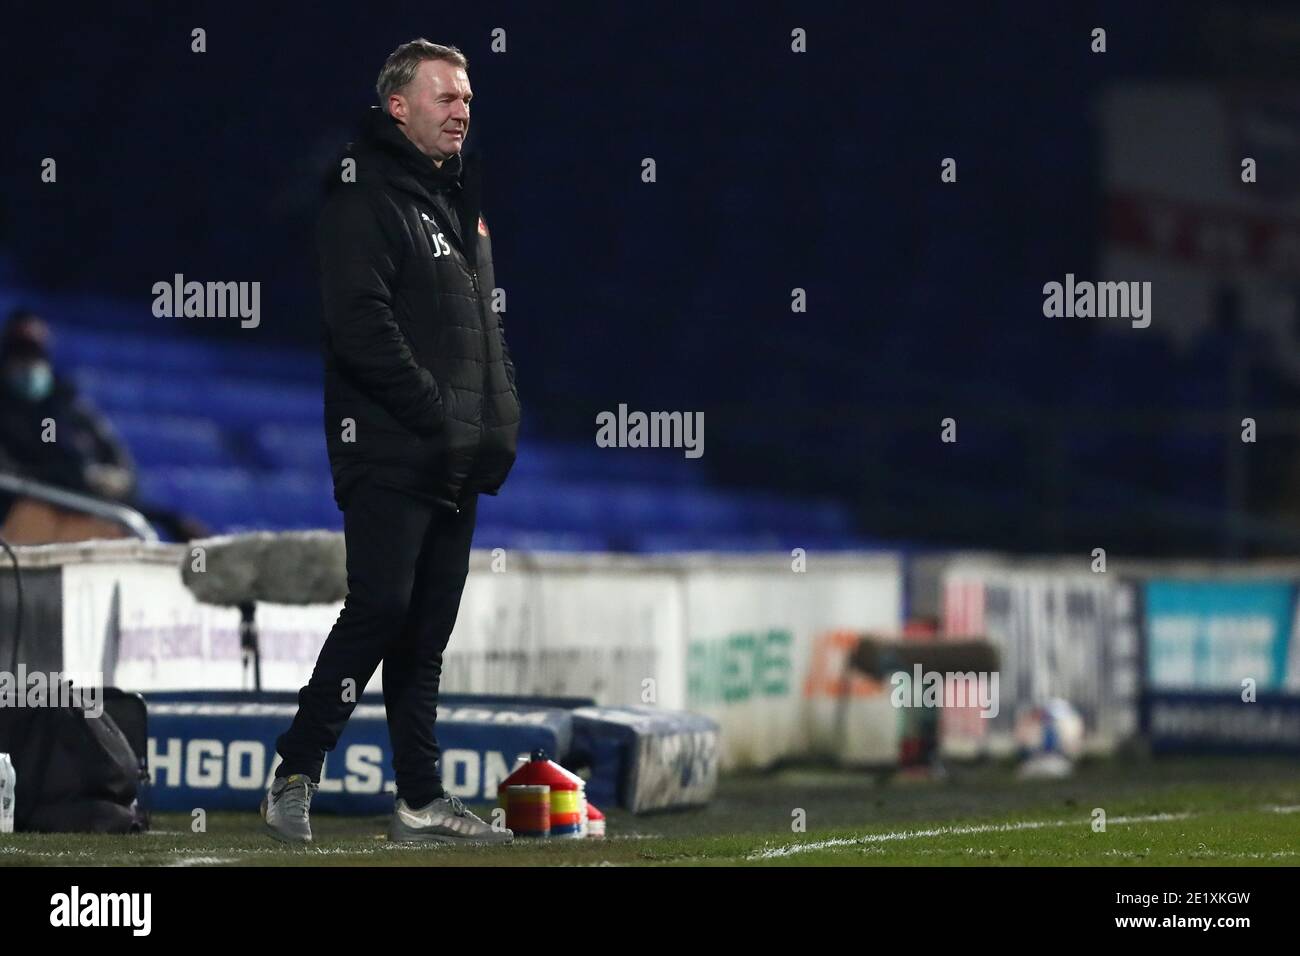 Manager of Swindon Town, John Sheridan - Ipswich Town v Swindon Town, Sky Bet League One, Portman Road, Ipswich, UK - 9th January 2021  Editorial Use Only - DataCo restrictions apply Stock Photo